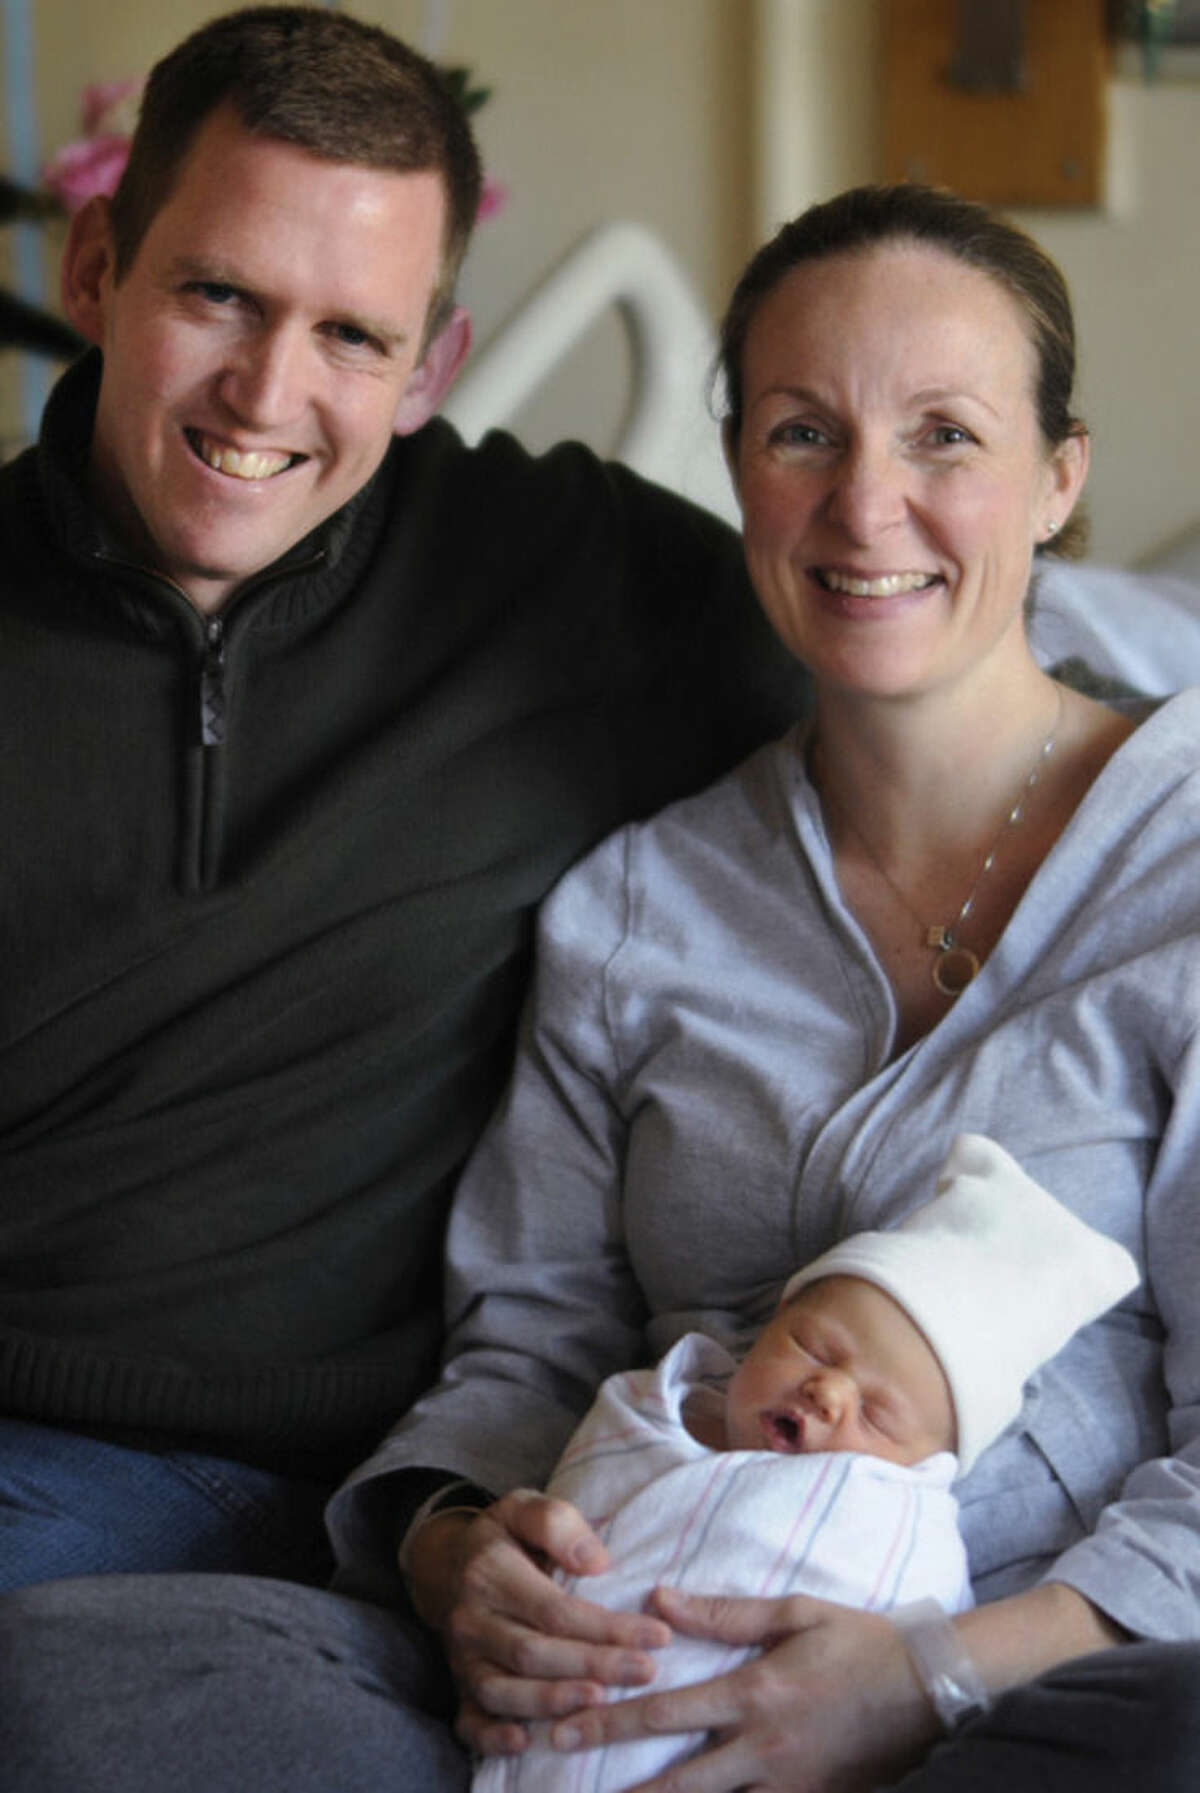 In a Sunday, Dec. 14, 2014 photo, Matthew and Jennie Keane pose with newborn daughter, Claire Elizabeth, born who was born at 10:11 a.m. on Saturday, making her birth time and date 10:11, 12-13-14. The Keanes, of Uxbridge, Mass.,hadn't even thought of the possible numerical feat until a nurse at UMass Memorial Medical Center in Worcester mentioned the combination. (AP Photo/Worcester Telegram & Gazette, Christine Peterson)